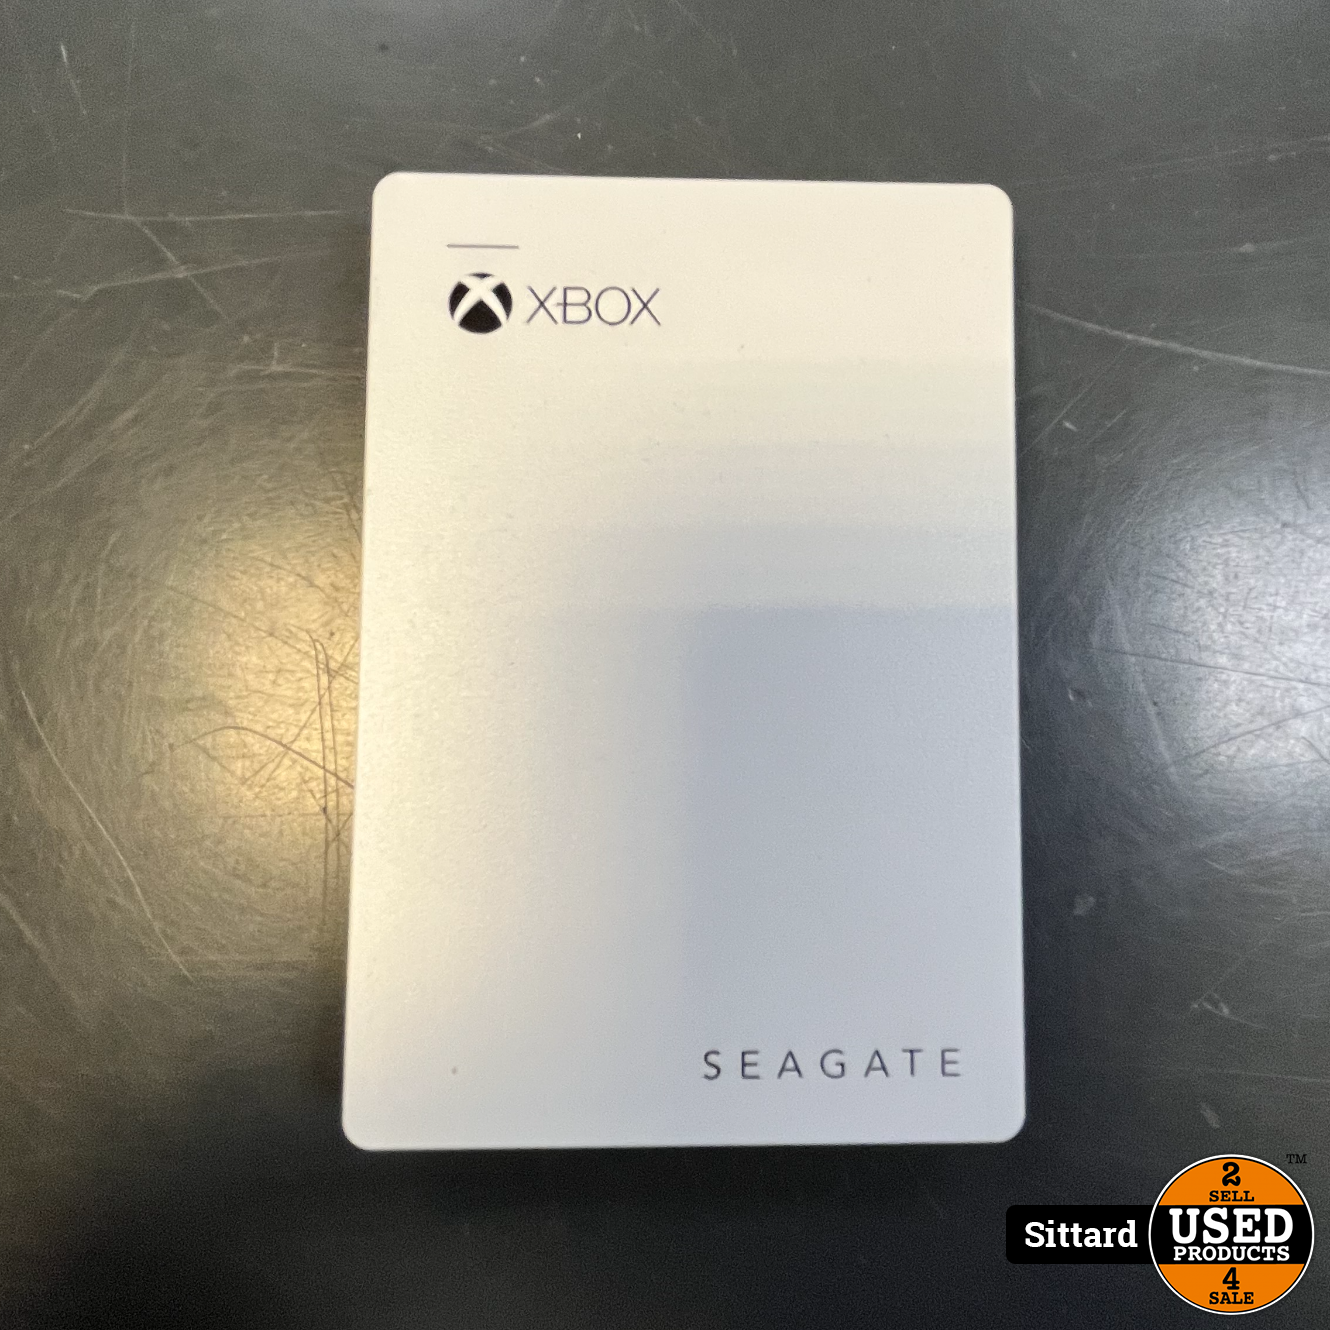 Scepticisme Wie Ervaren persoon Xbox - Seagate Externe harde schijf, 2TB, In nette staat - Used Products  Sittard